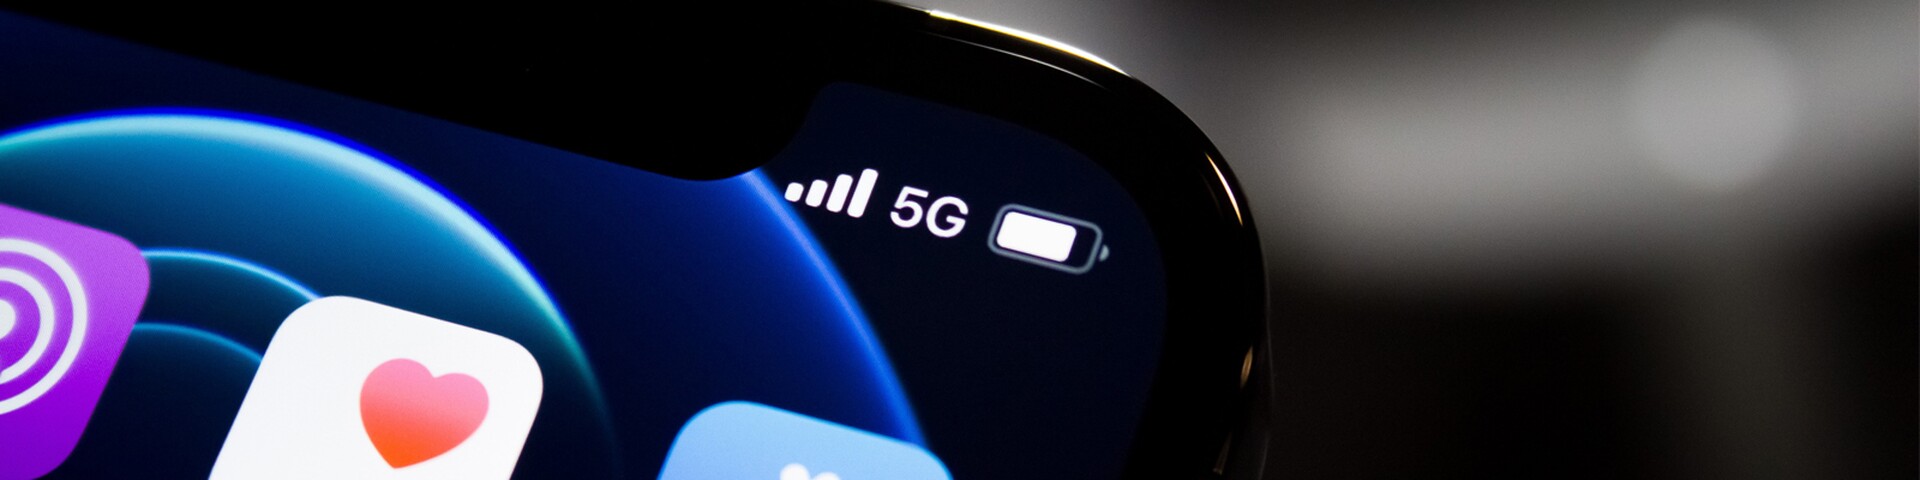 Managing devices via Nebula makes 5G/LTE an even better option